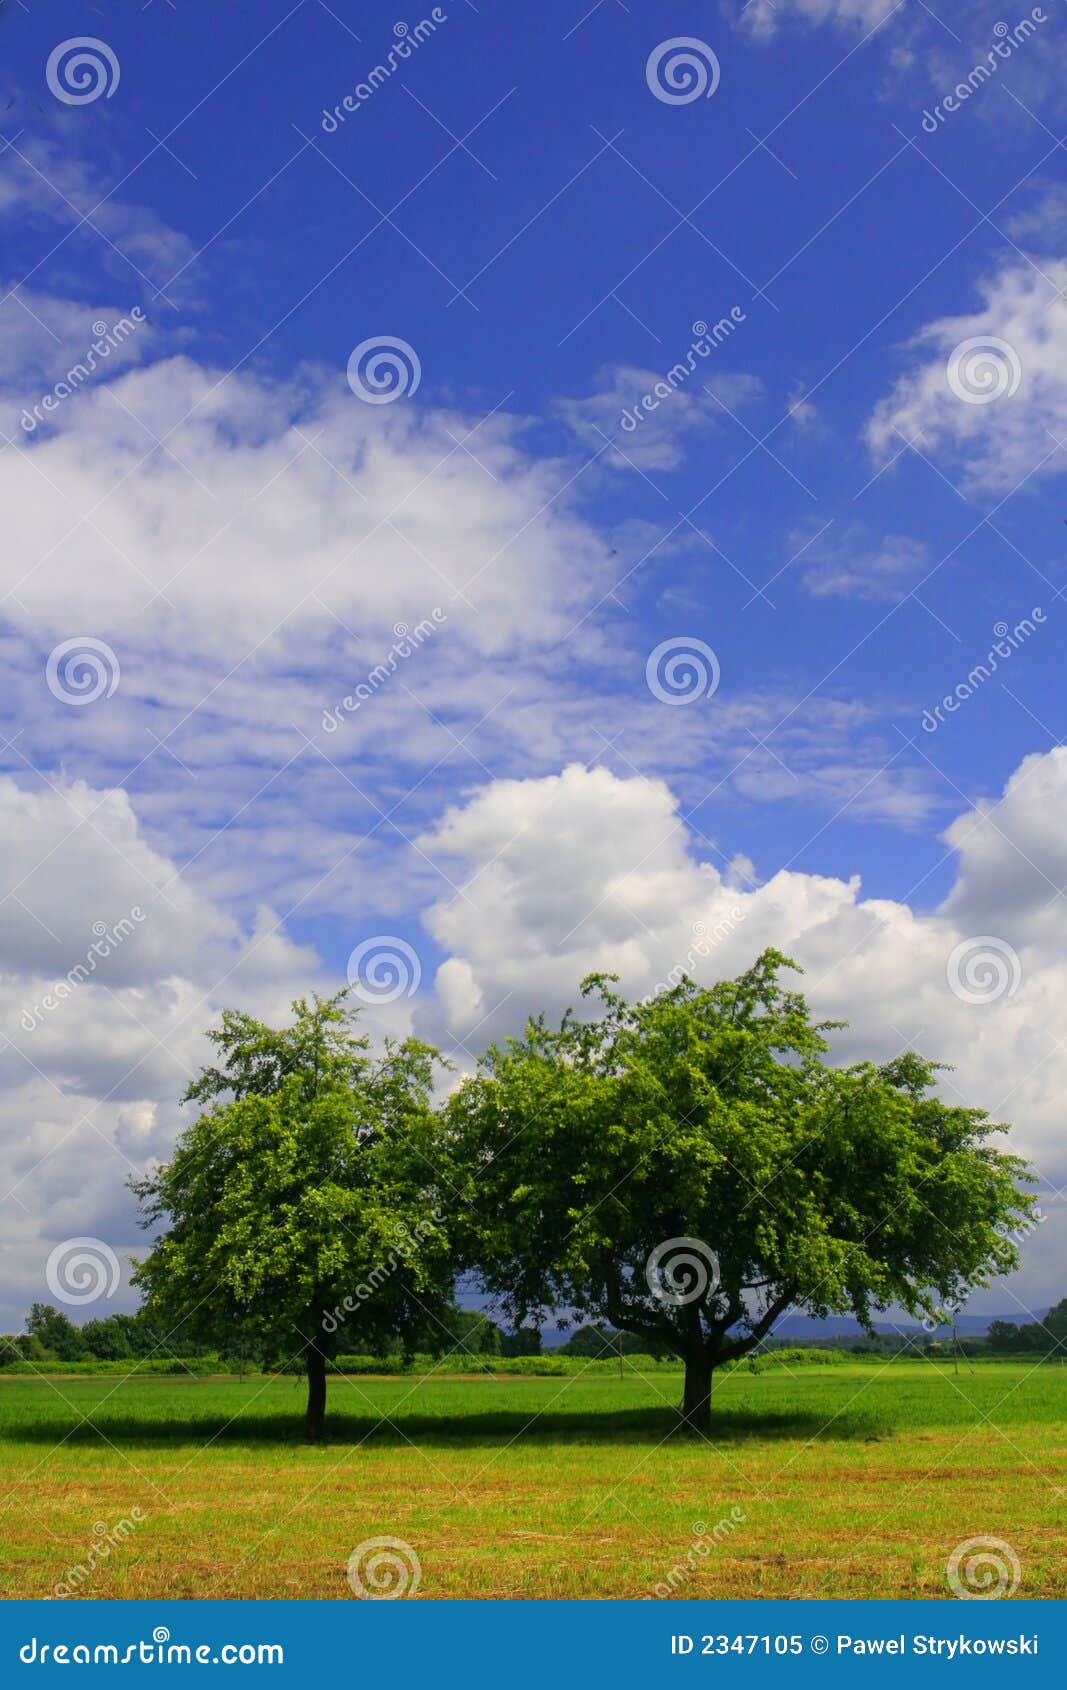 two trees on the acre